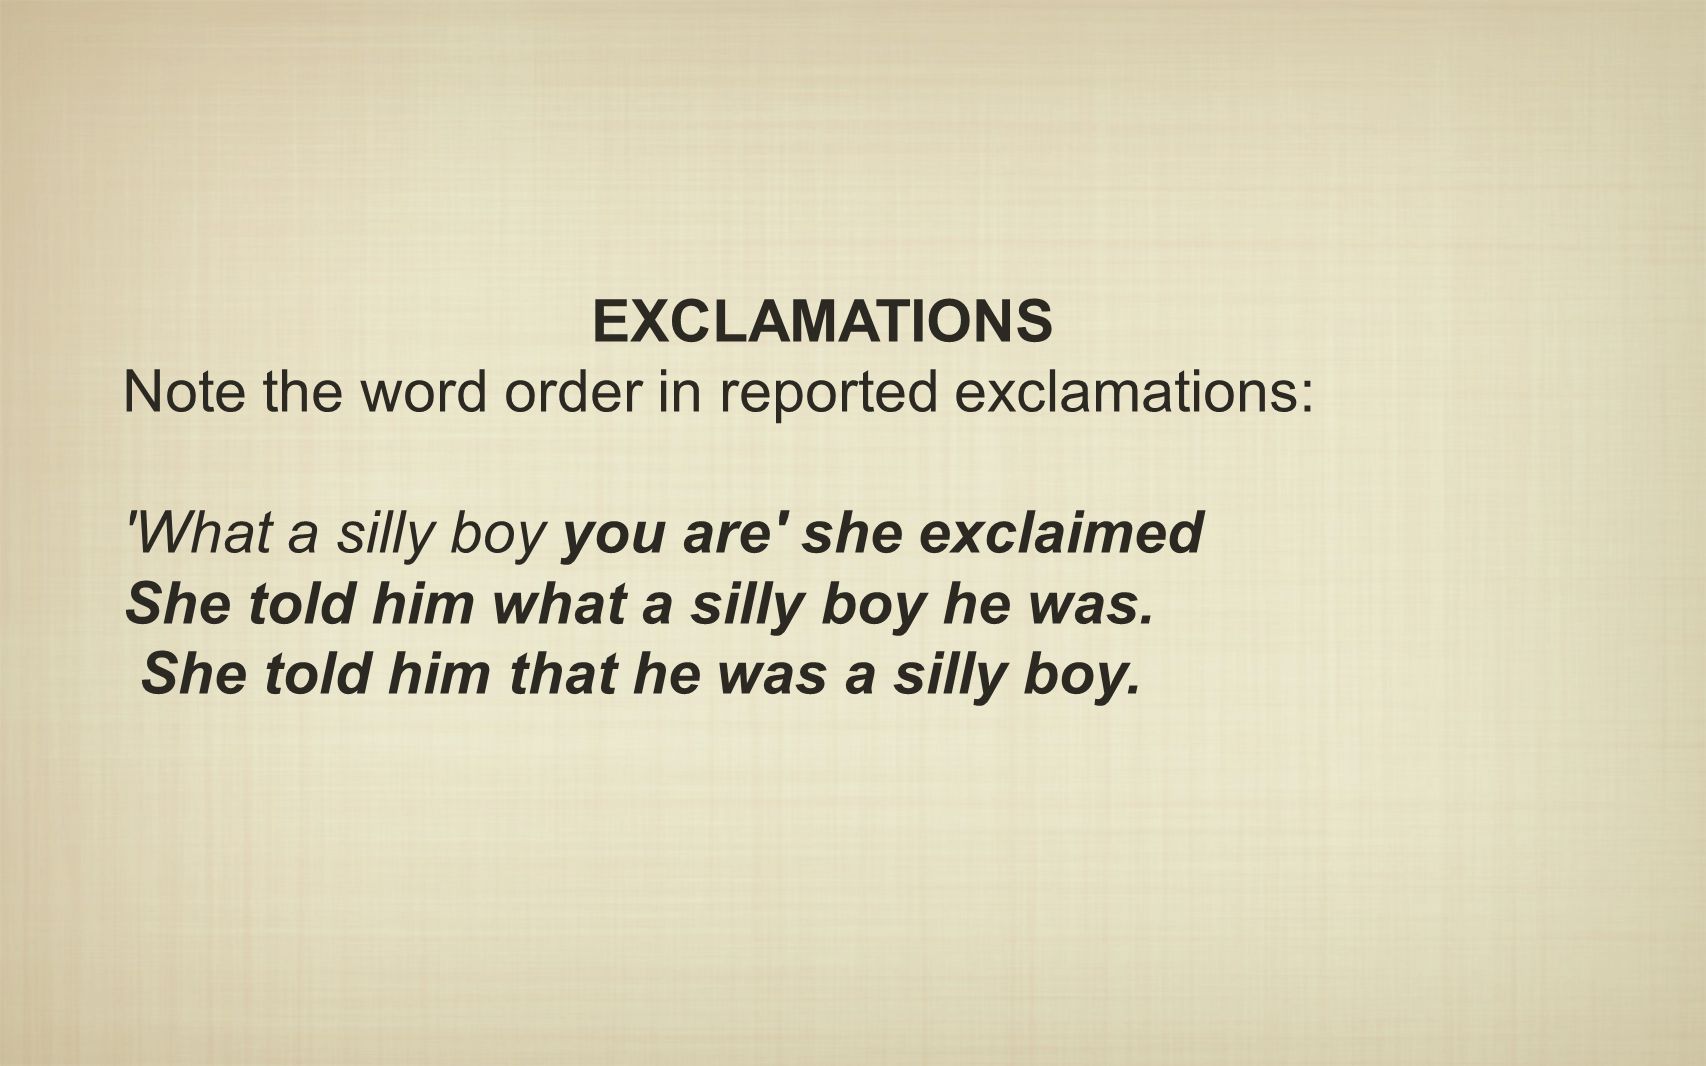 EXCLAMATIONS Note the word order in reported exclamations: What a silly boy you are she exclaimed.